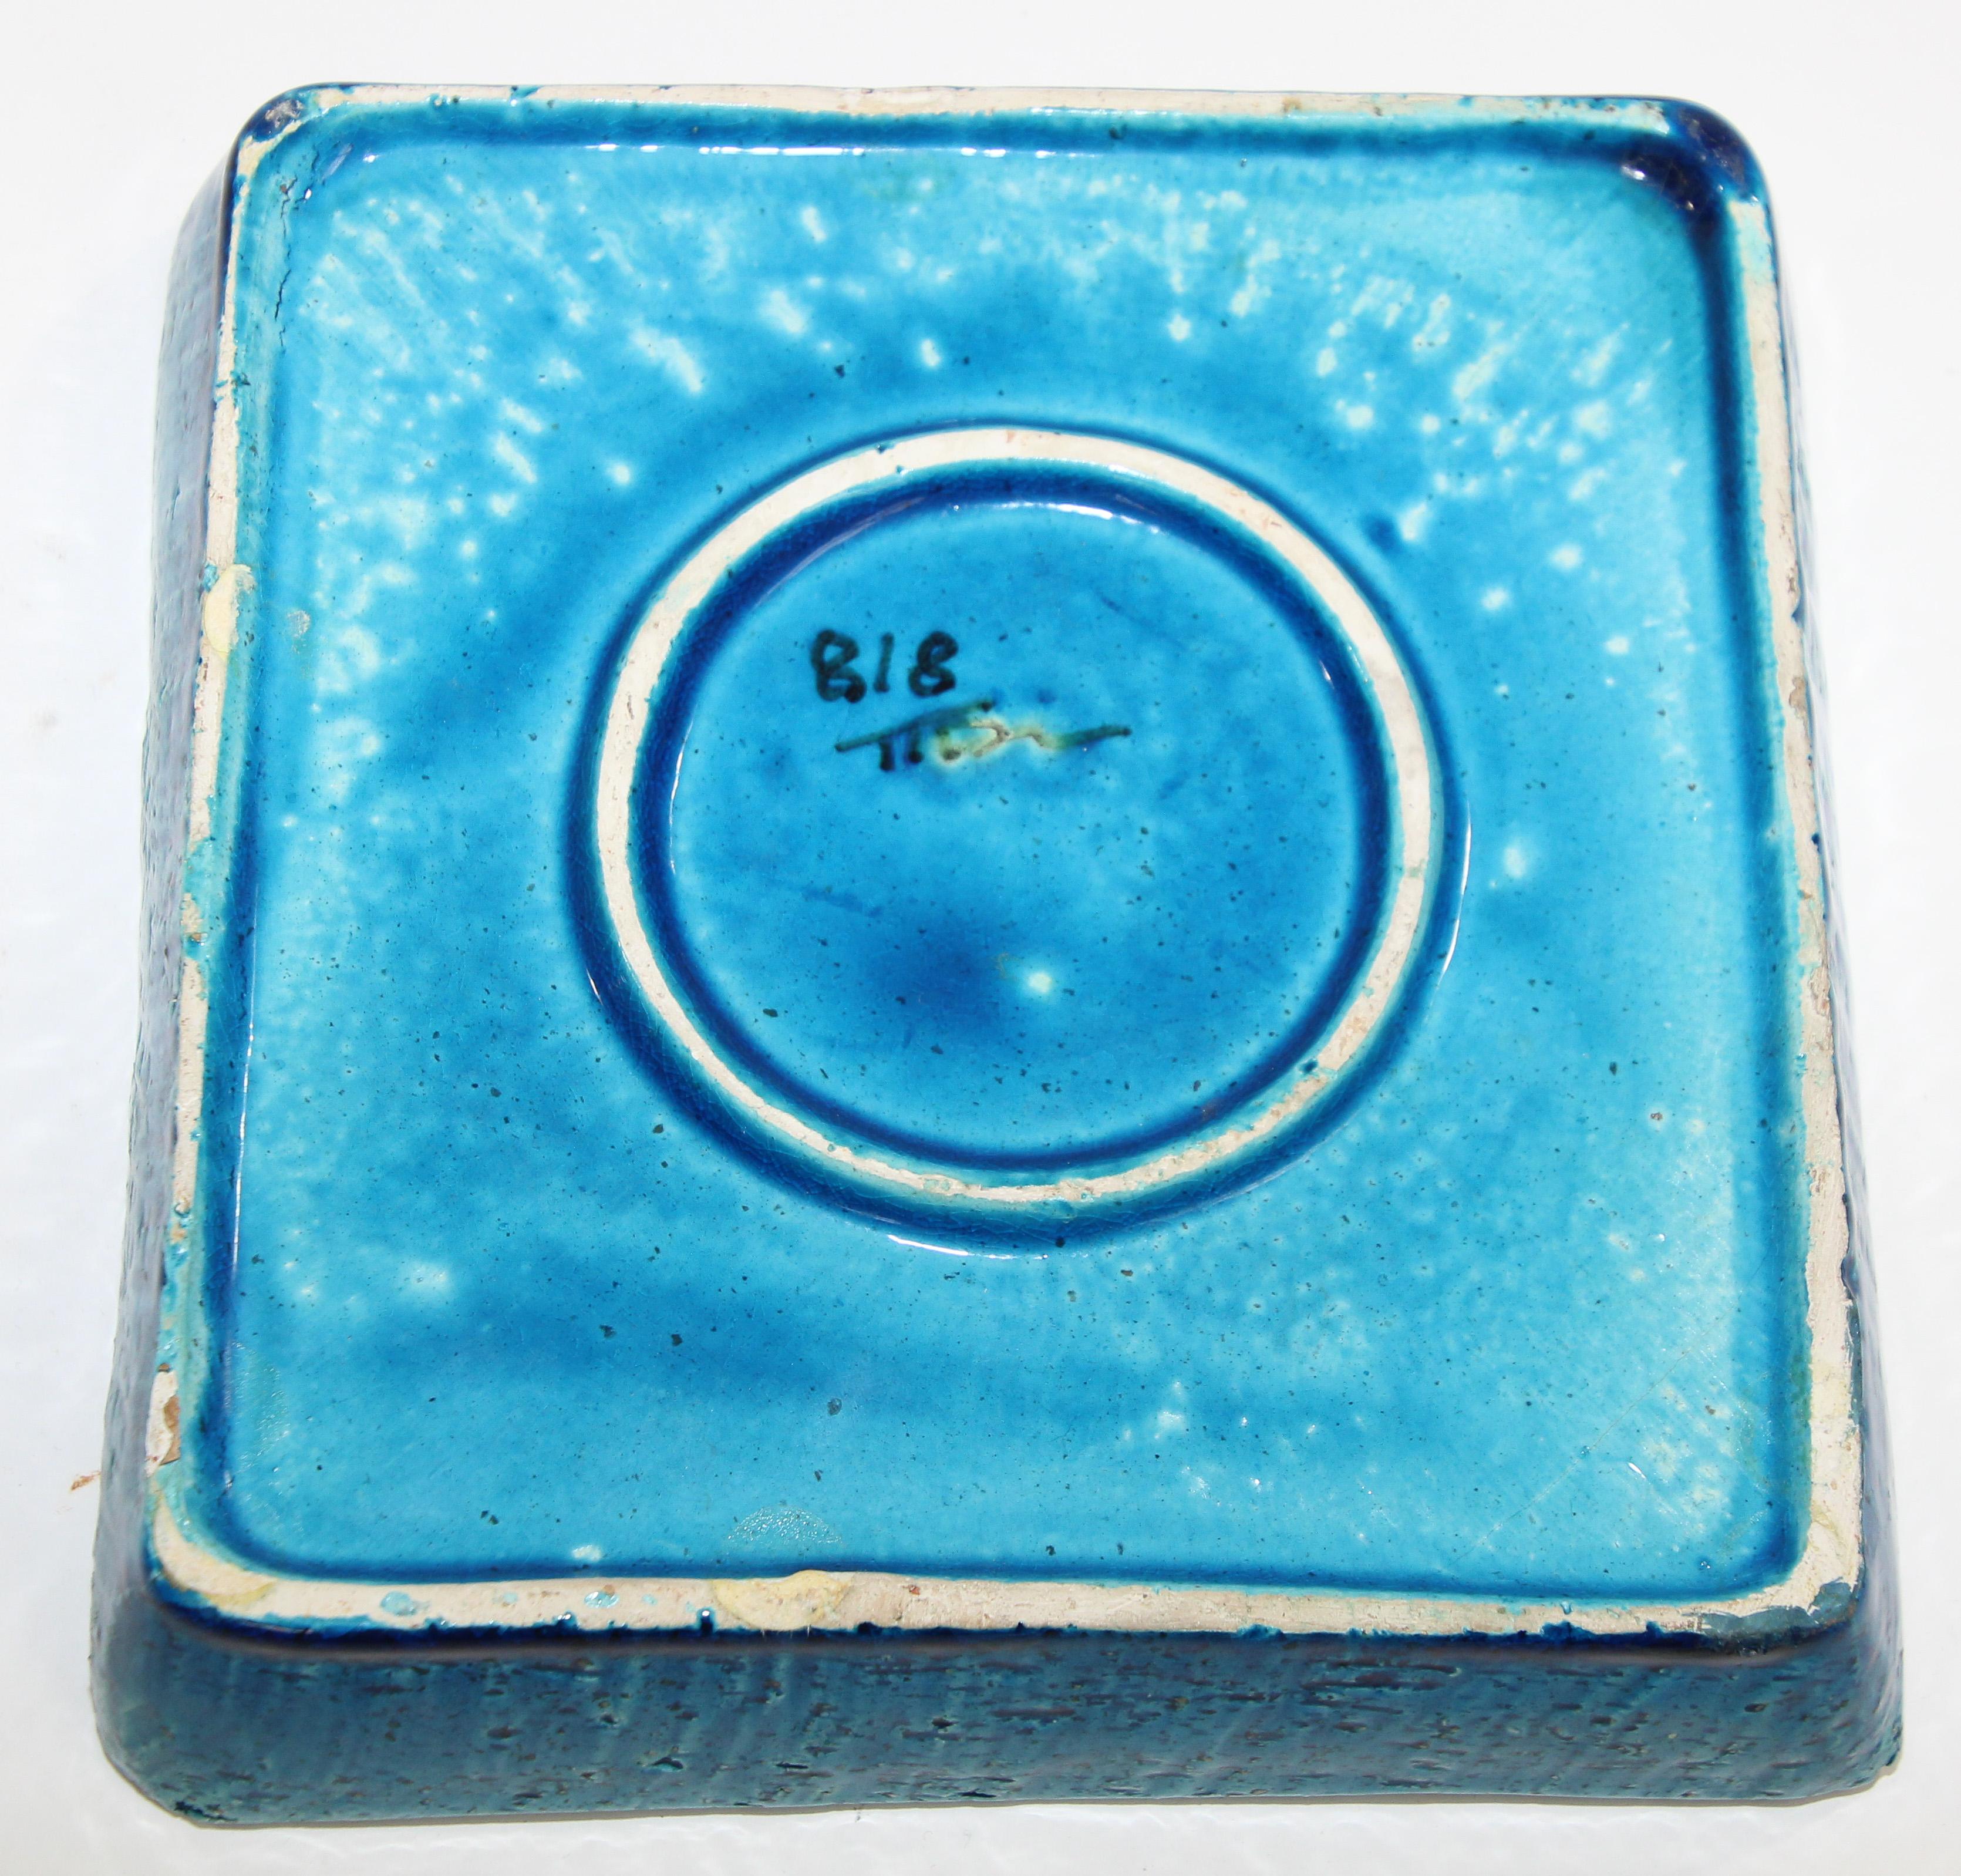 Blue Ceramic Ashtray by Aldo Londi for Bitossi Handcrafted in Italy For Sale 6